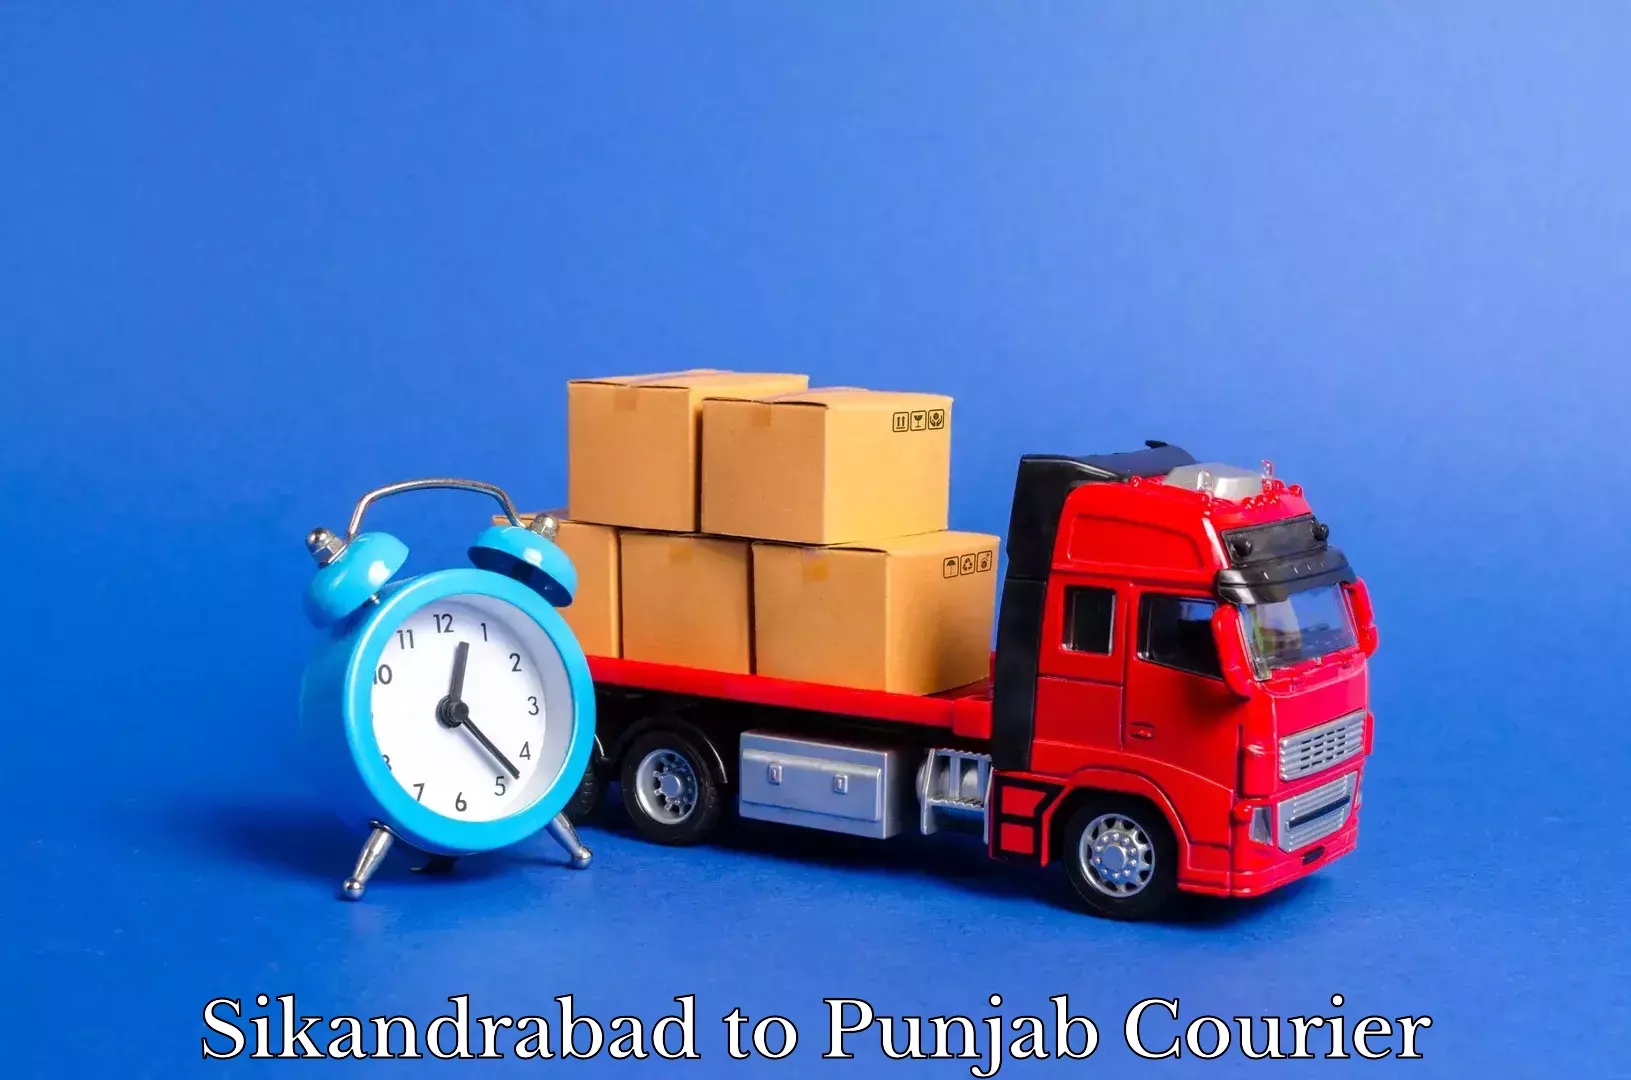 Professional movers and packers in Sikandrabad to Rupnagar